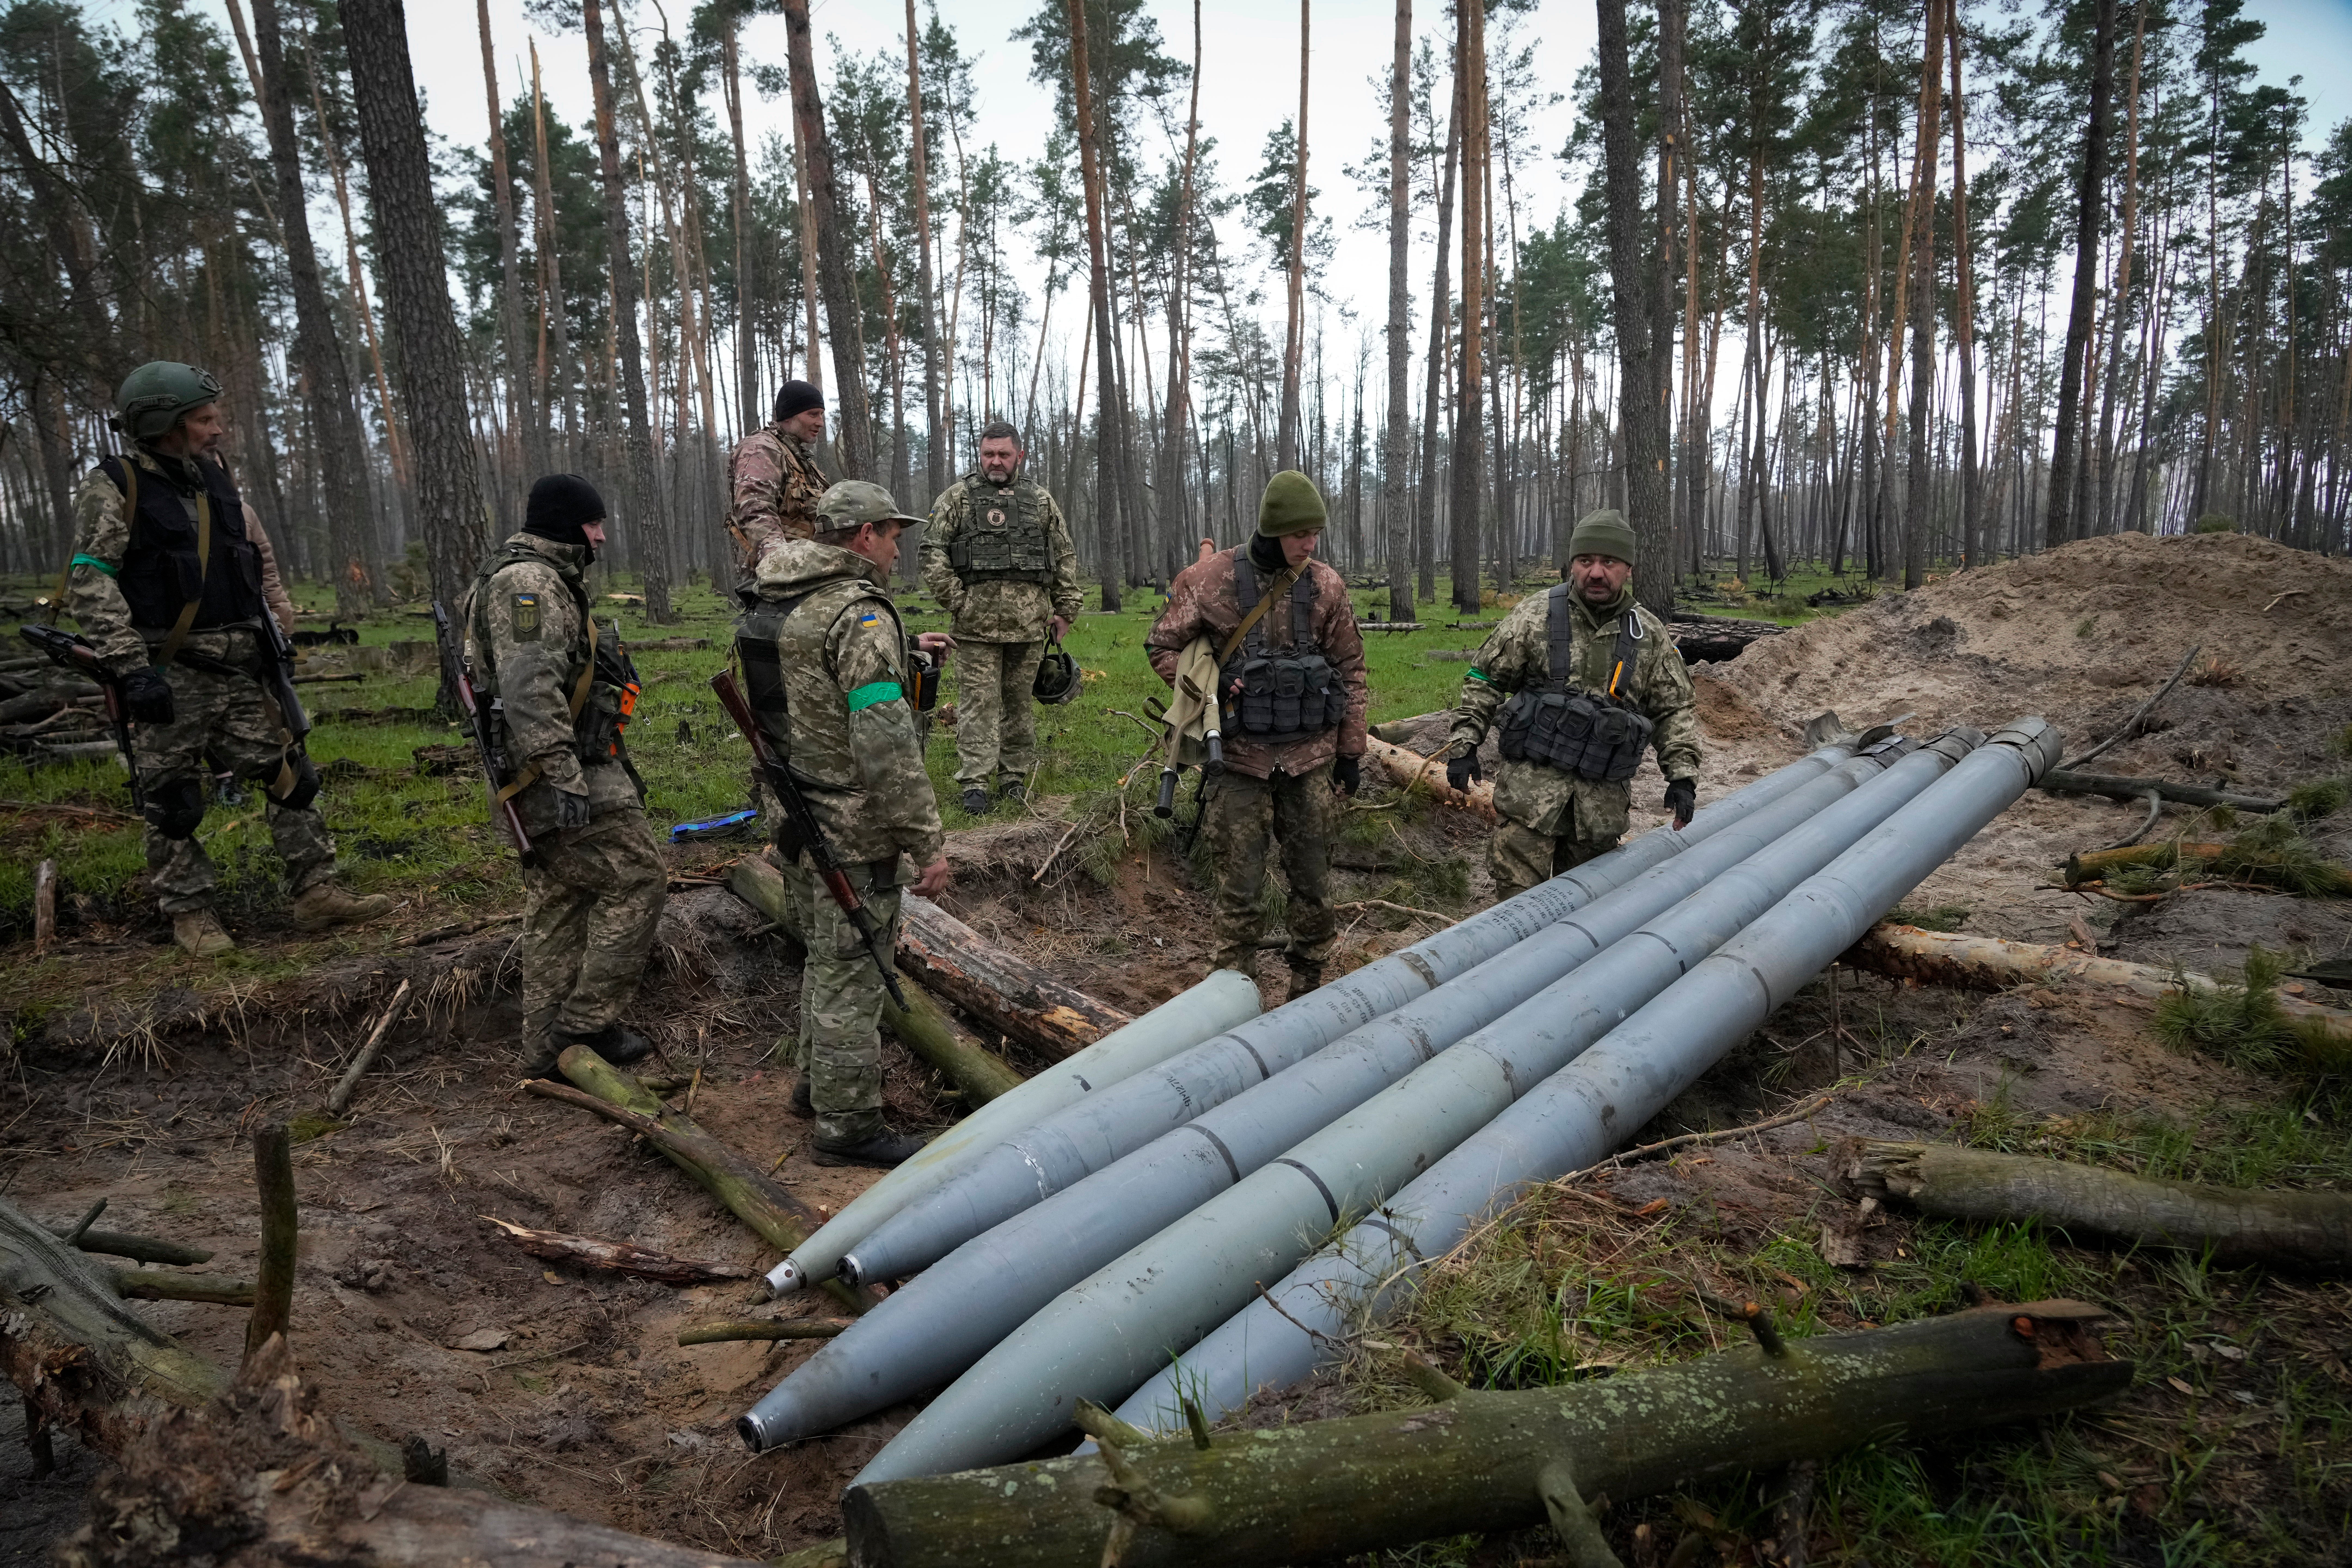 Ukranian soldiers surveying Russian missiles.